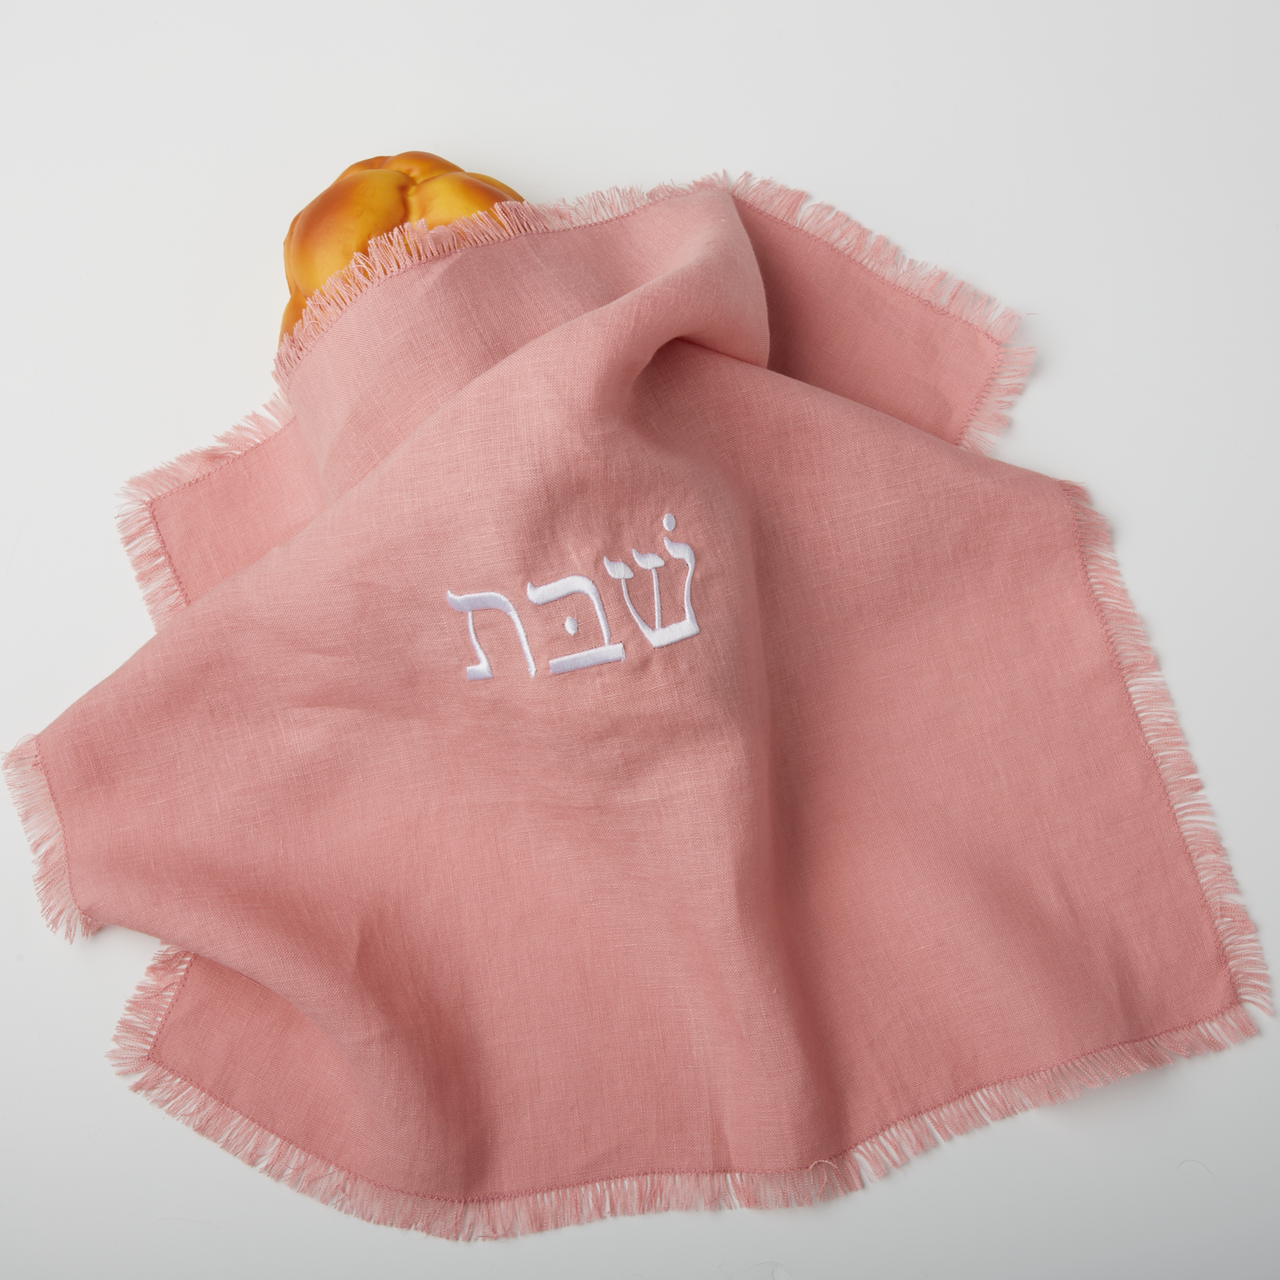 Oneg Challah Covers Embroidered Linen Challah Cover - Dusty Rose